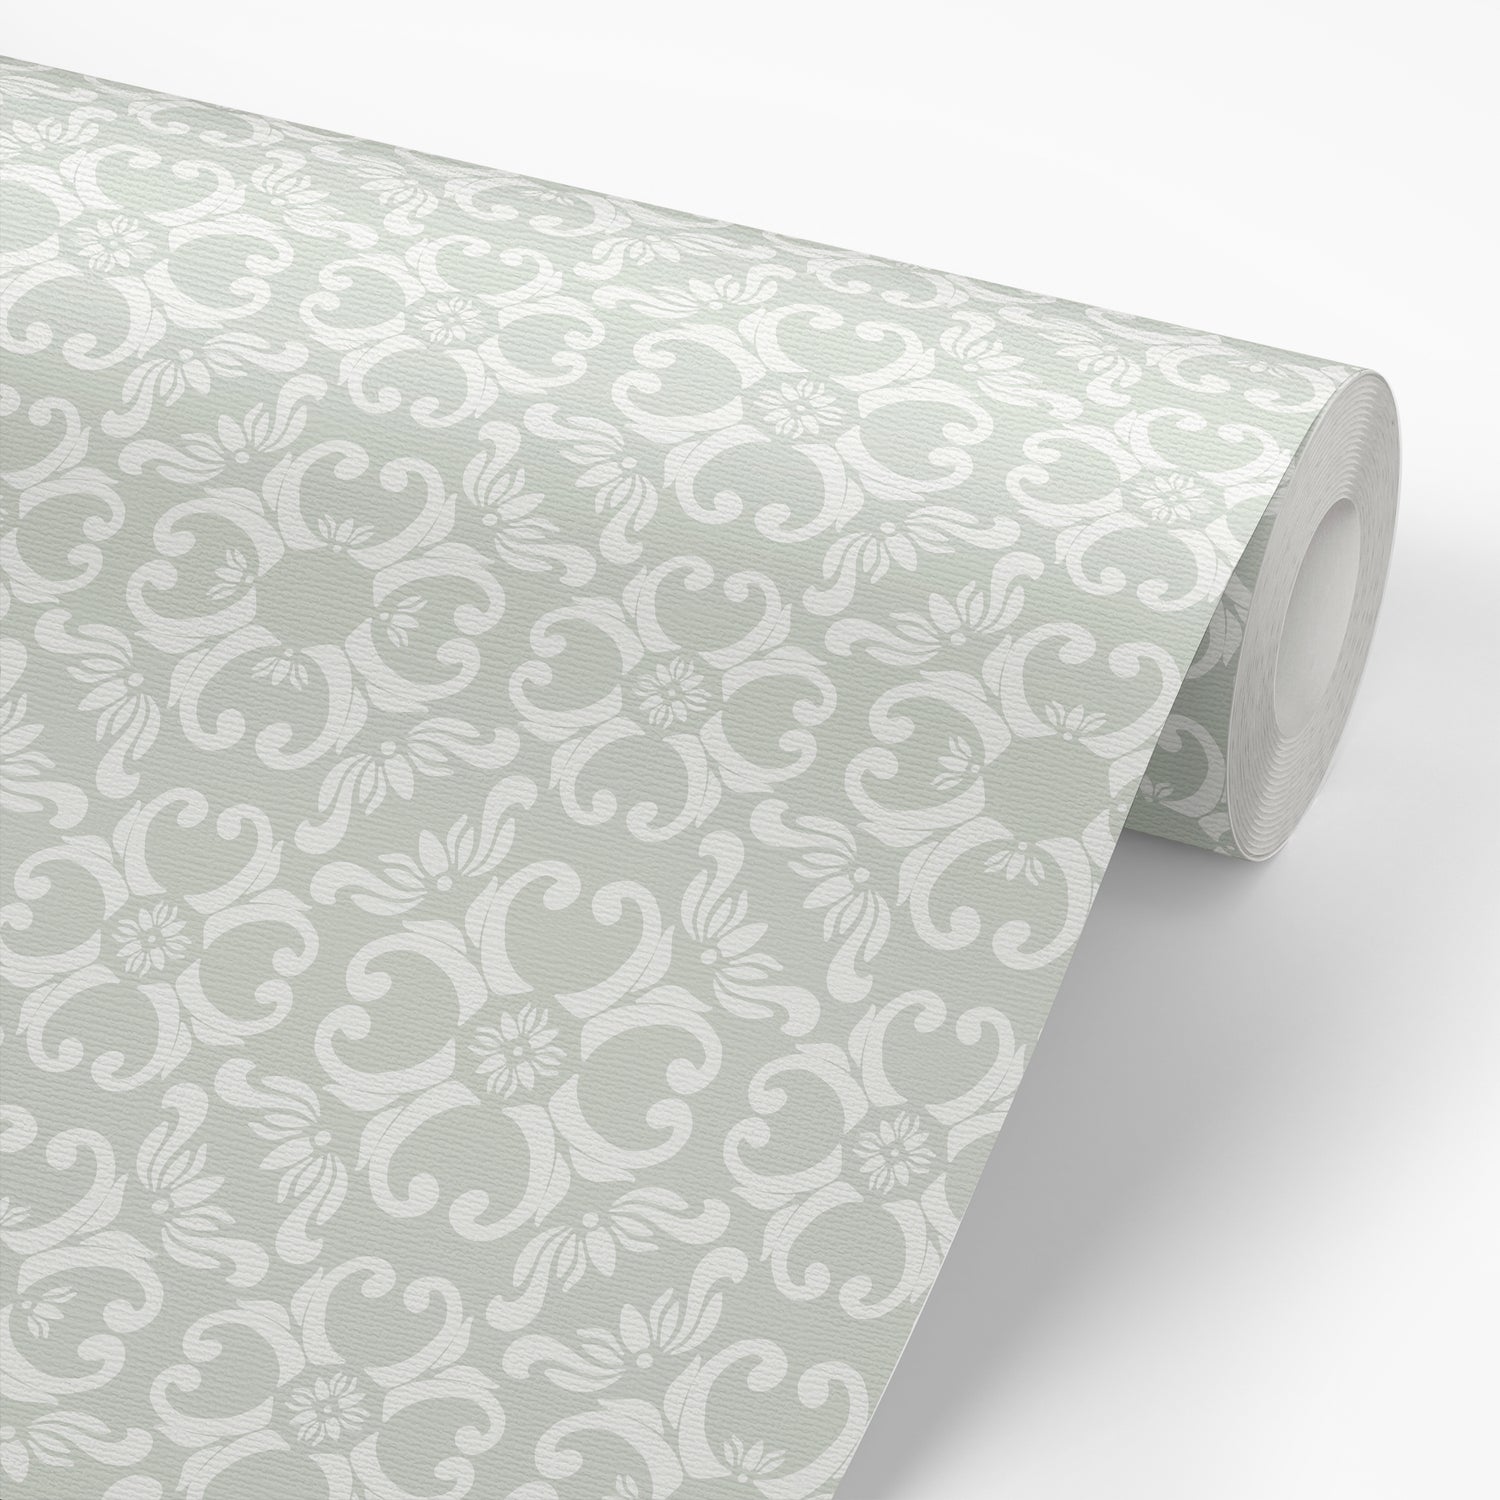 Ayara's peel and stick removable Spanish Tiles Wallpaper in Sage featured on a roll of wallpaper.